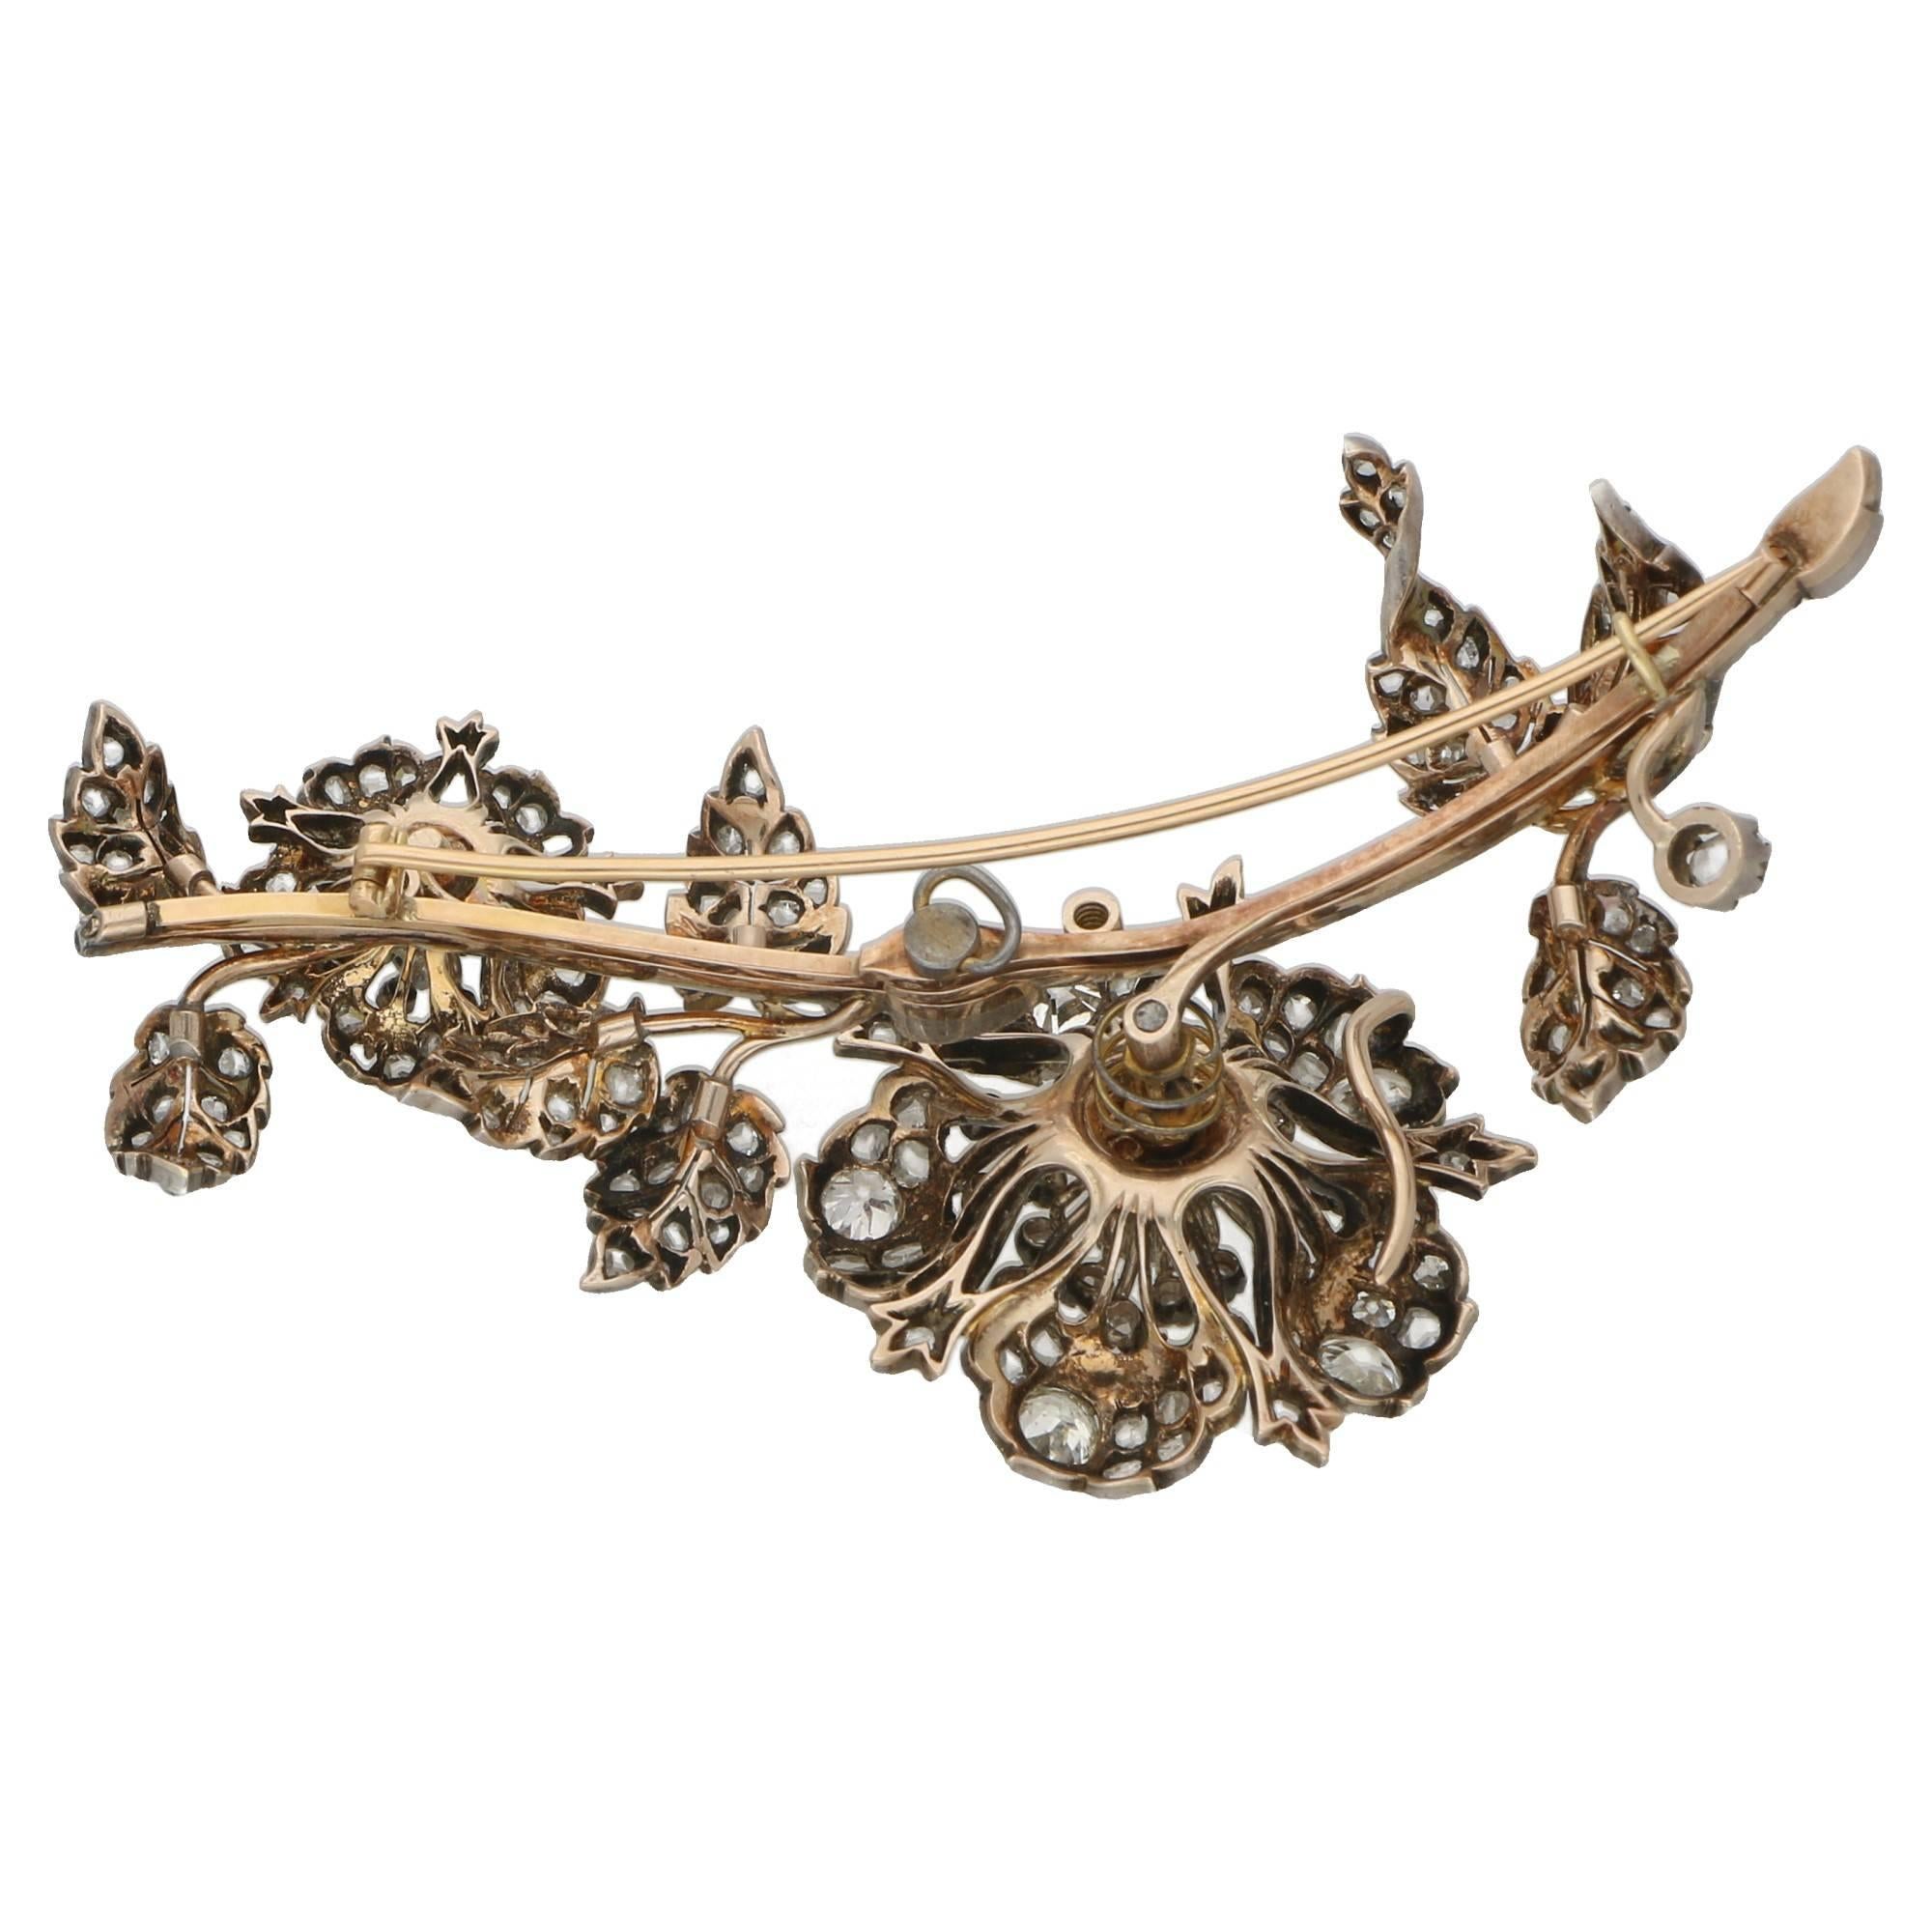 A notable Victorian diamond brooch set in silver on gold, designed as a floral and foliate spray centering on a detachable flower head set 